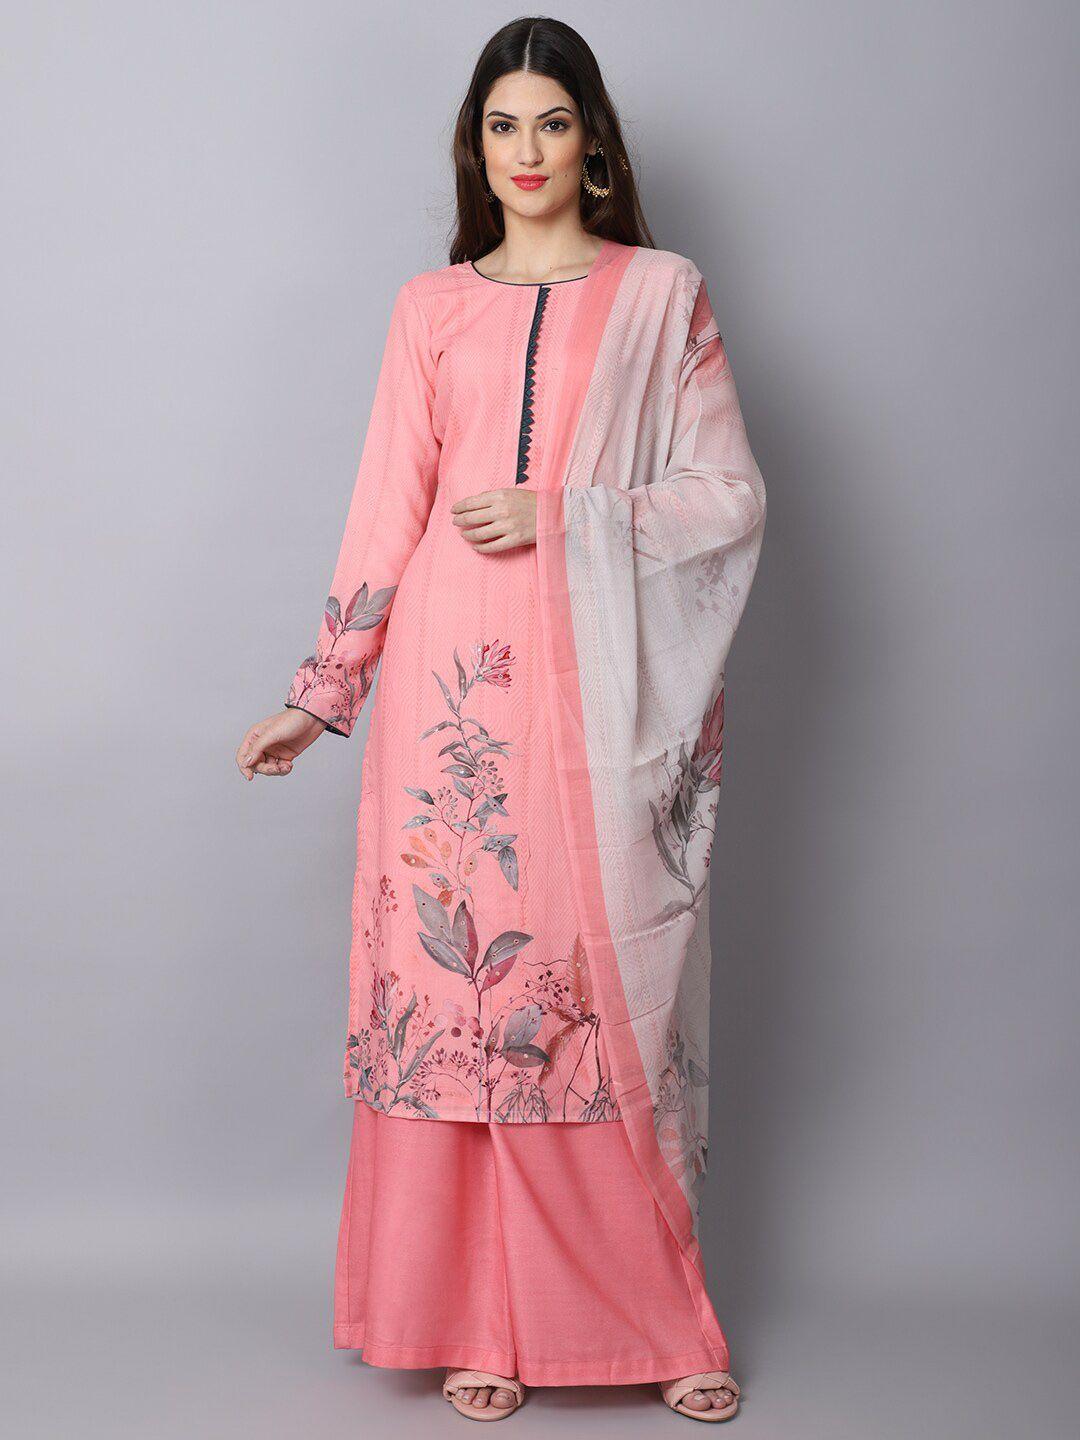 stylee-lifestyle-peach-coloured-&-grey-pure-cotton-unstitched-dress-material